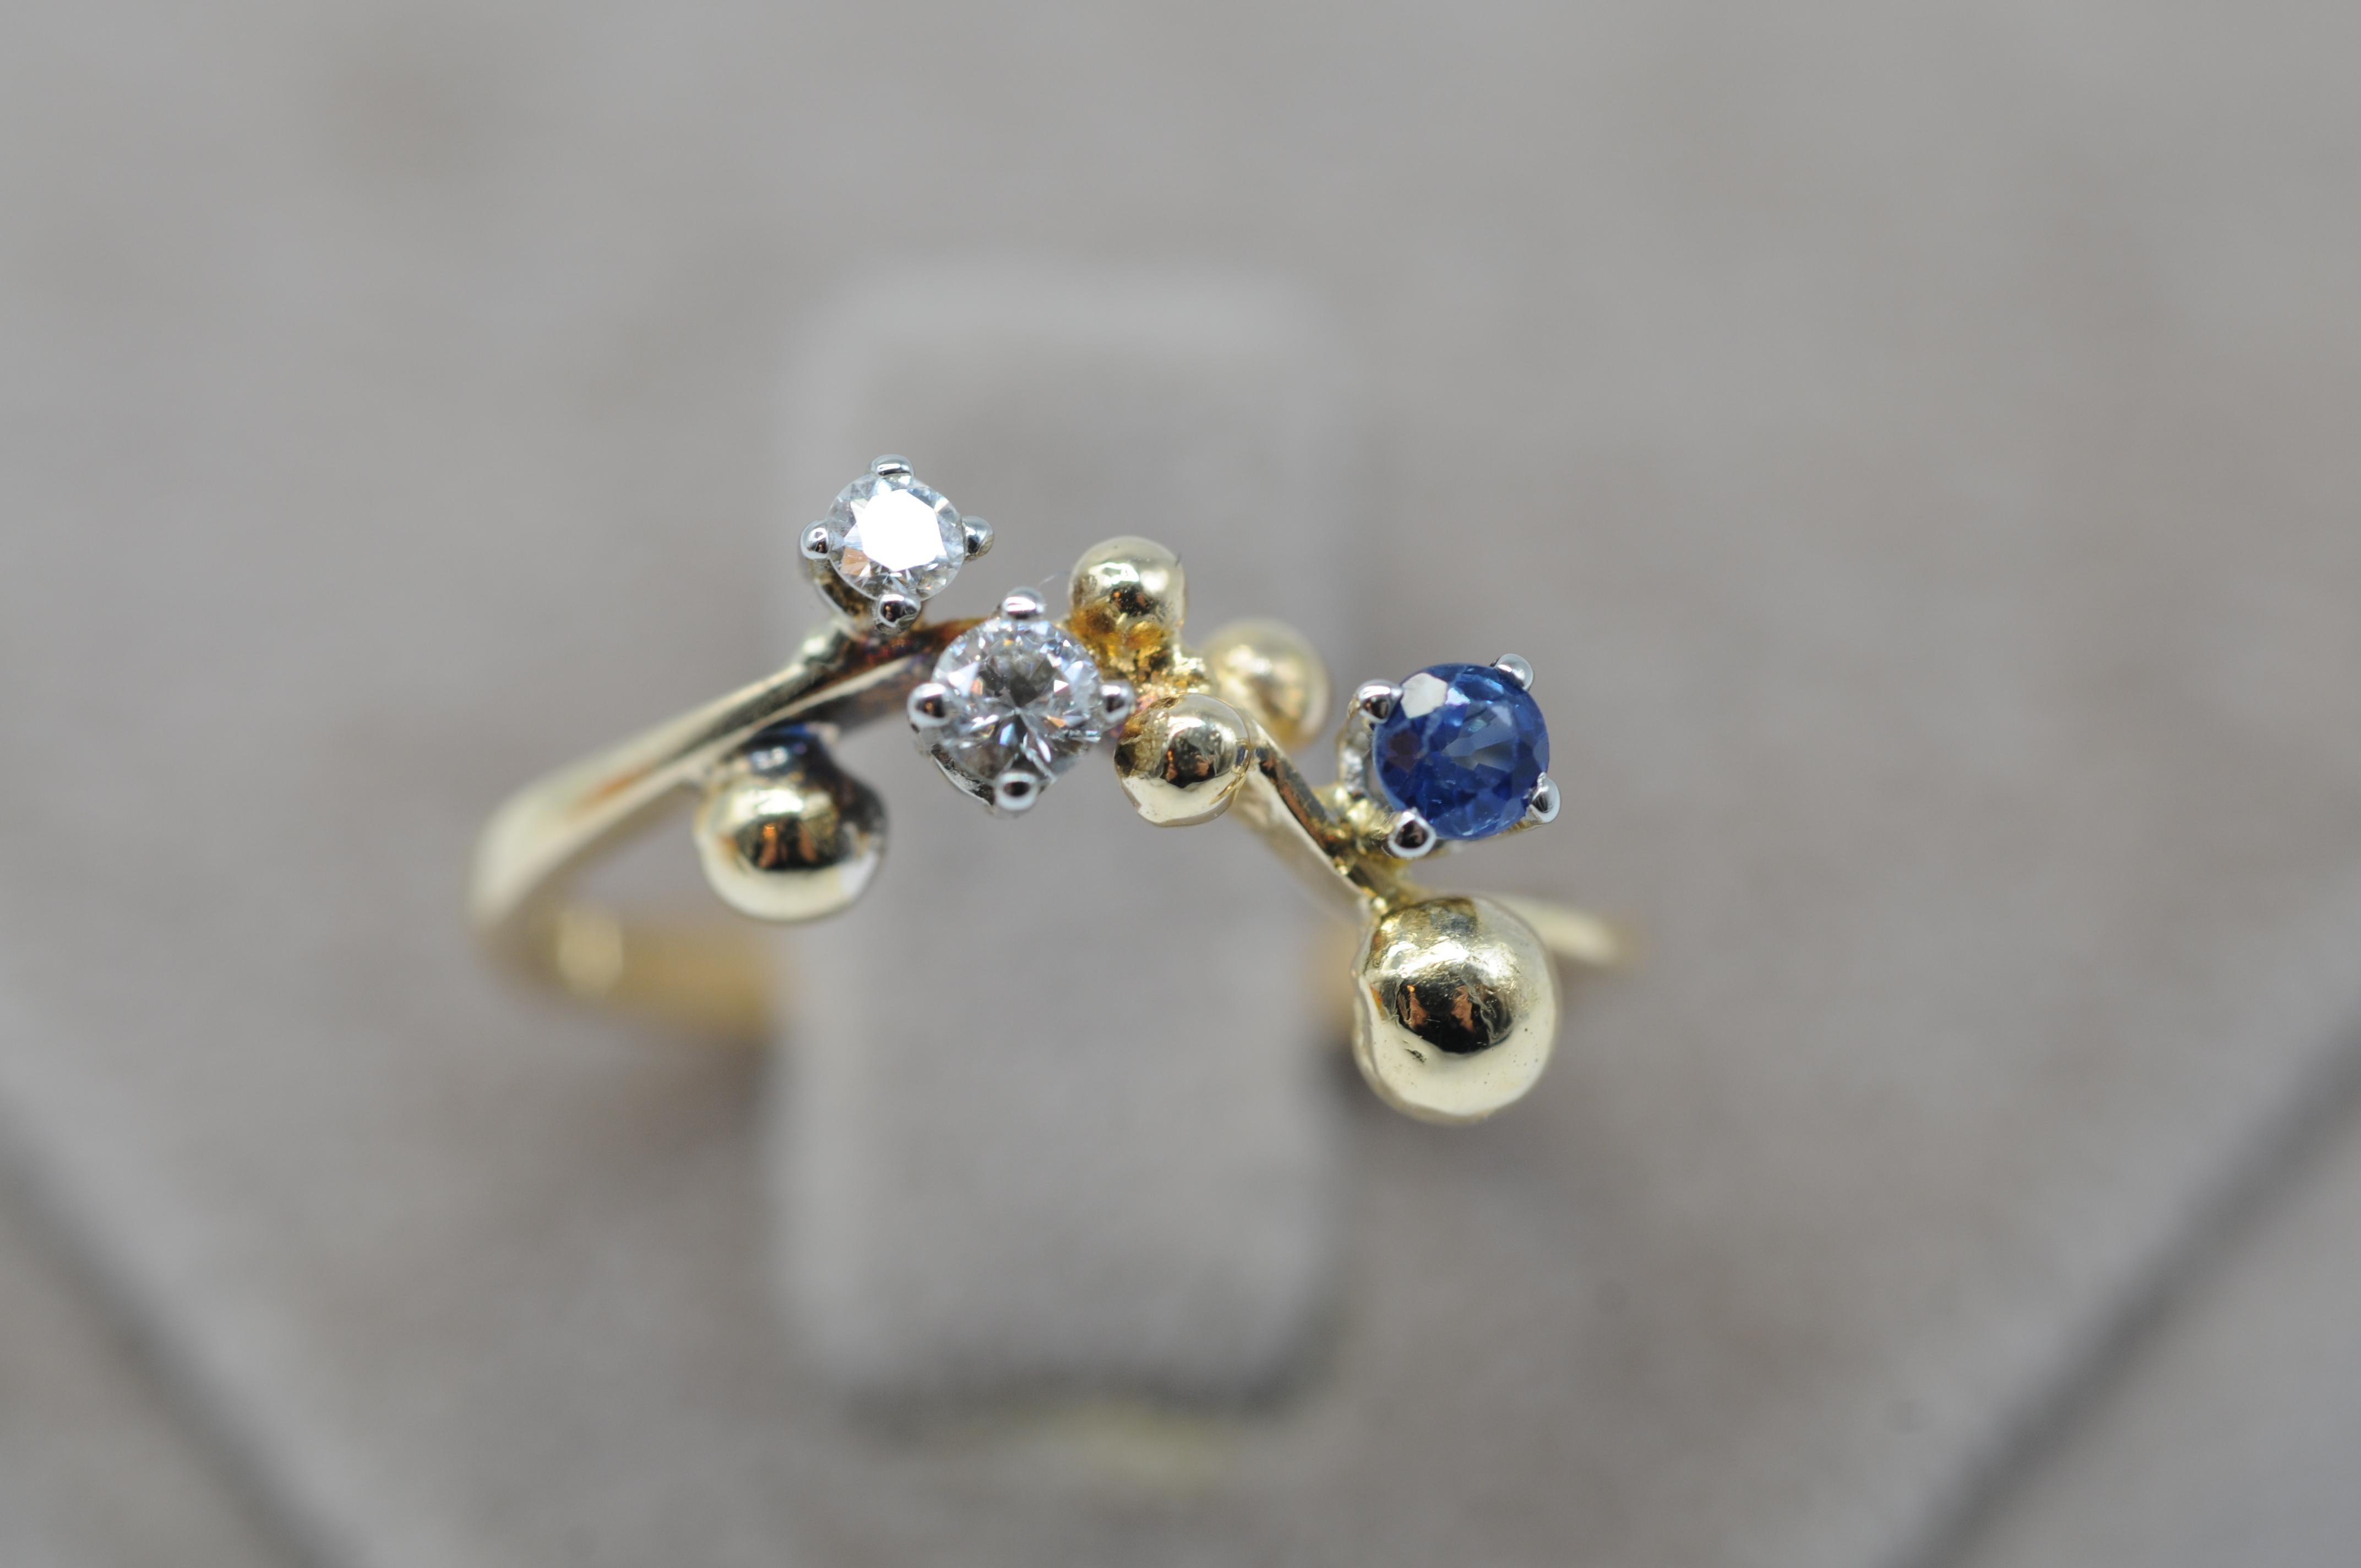 Step into a realm of unparalleled beauty with this exquisite 18k yellow gold ring, adorned with two dazzling diamonds in brilliant cuts and a captivating blue sapphire, all masterfully crafted by the esteemed German goldsmith, Master Wurzbacher.

As